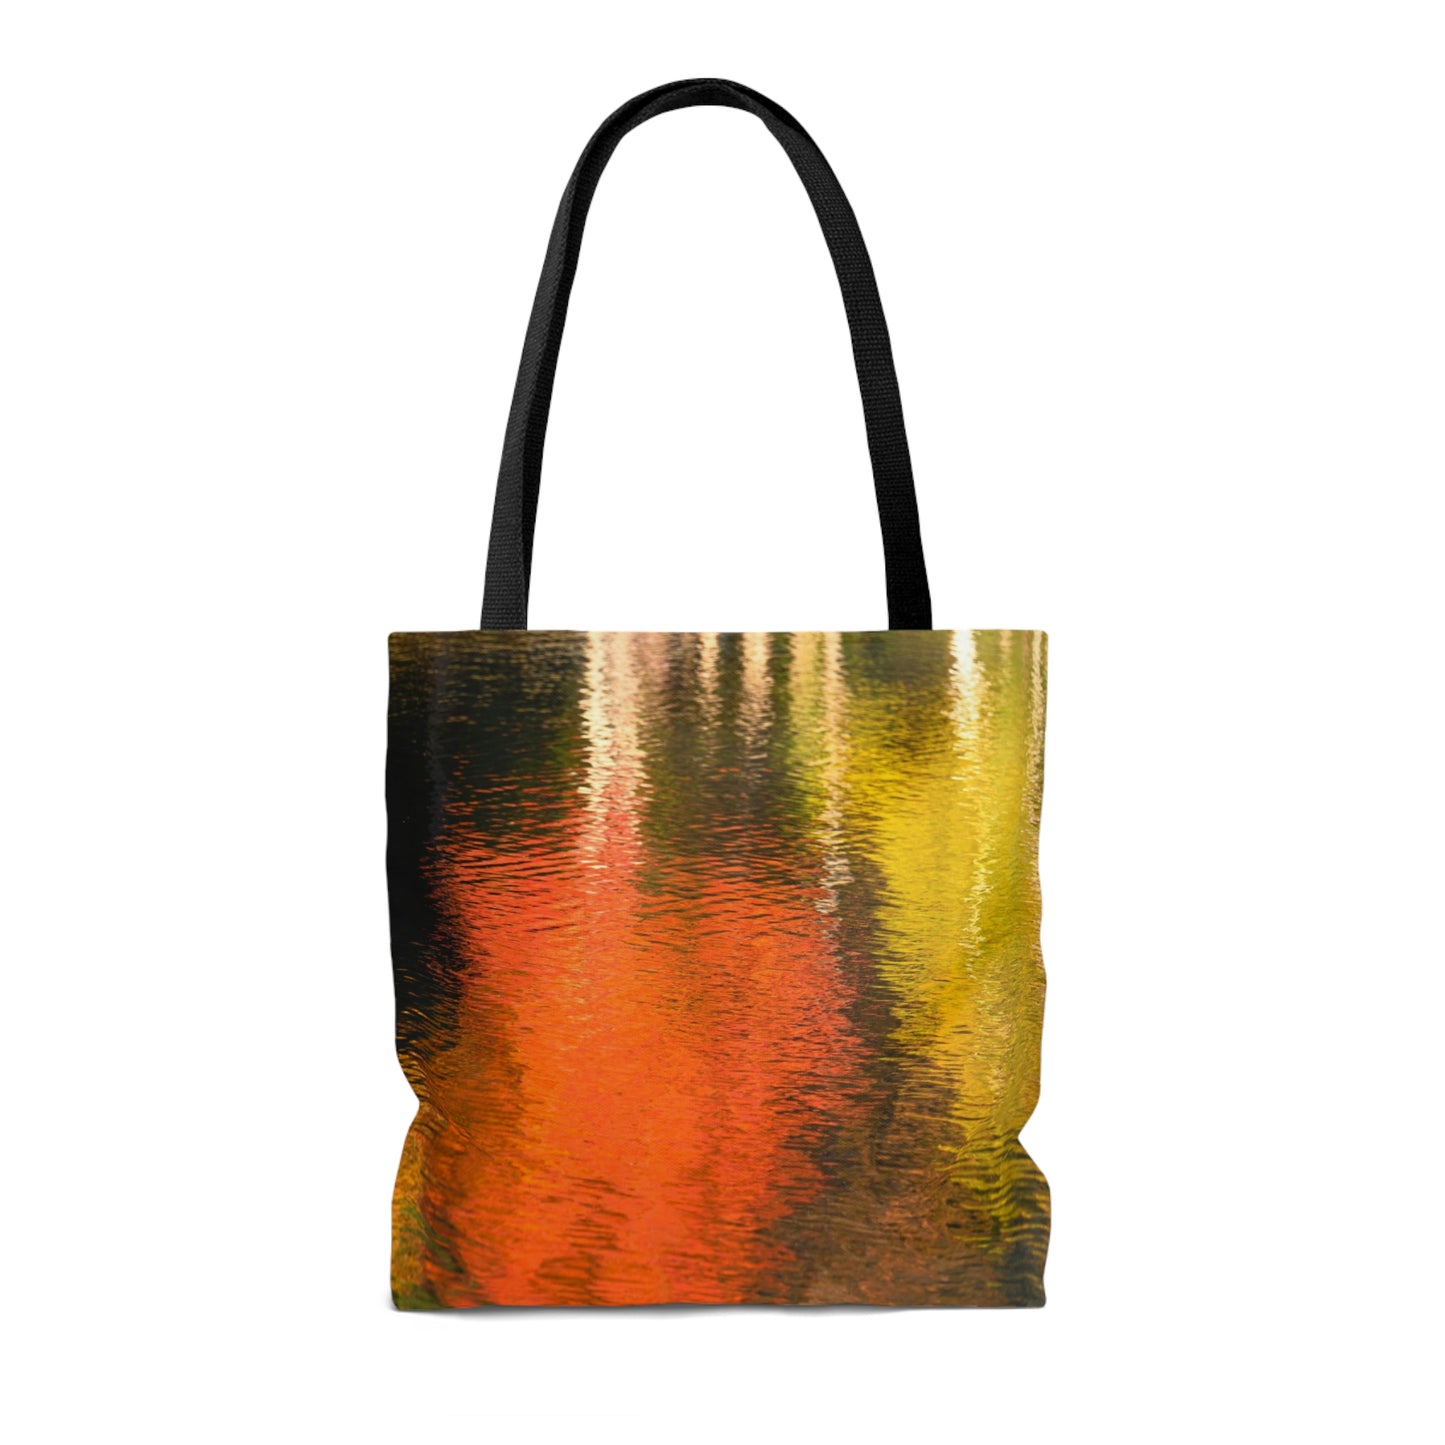 Tote Bag - Reflections of Autumn